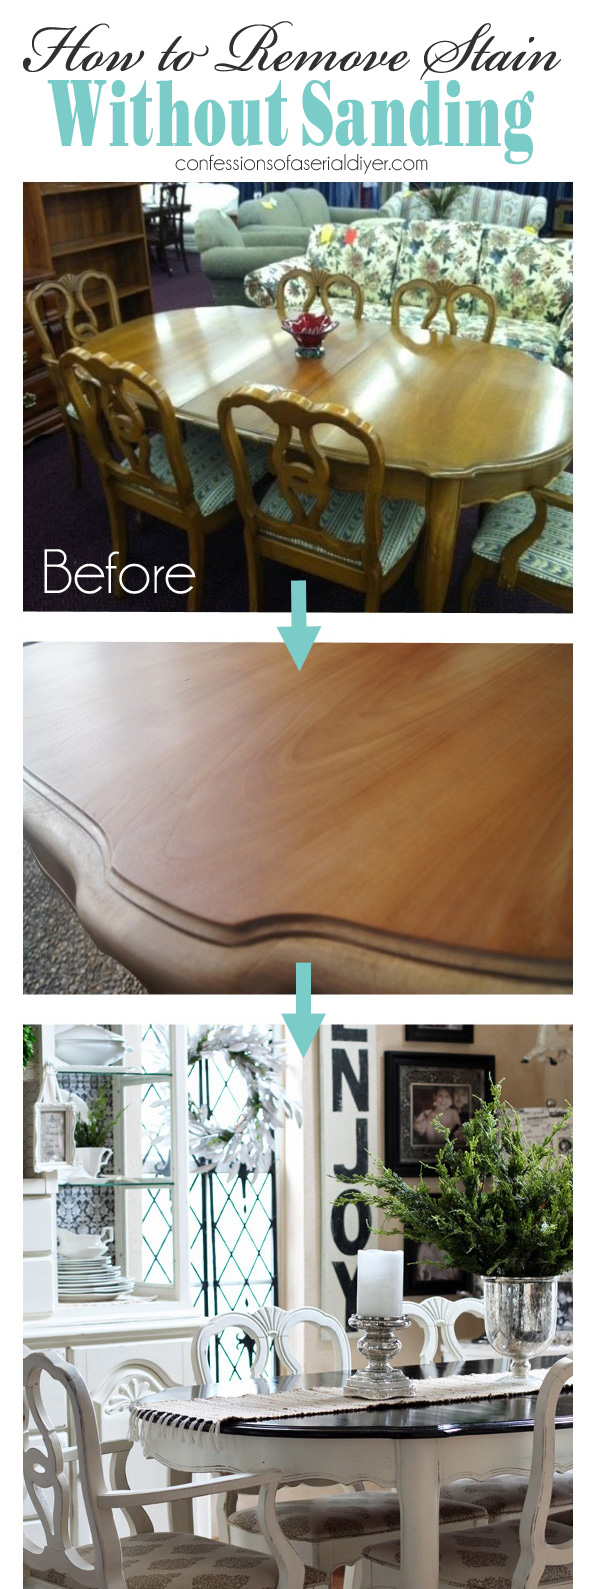 How to remove stain without sanding!